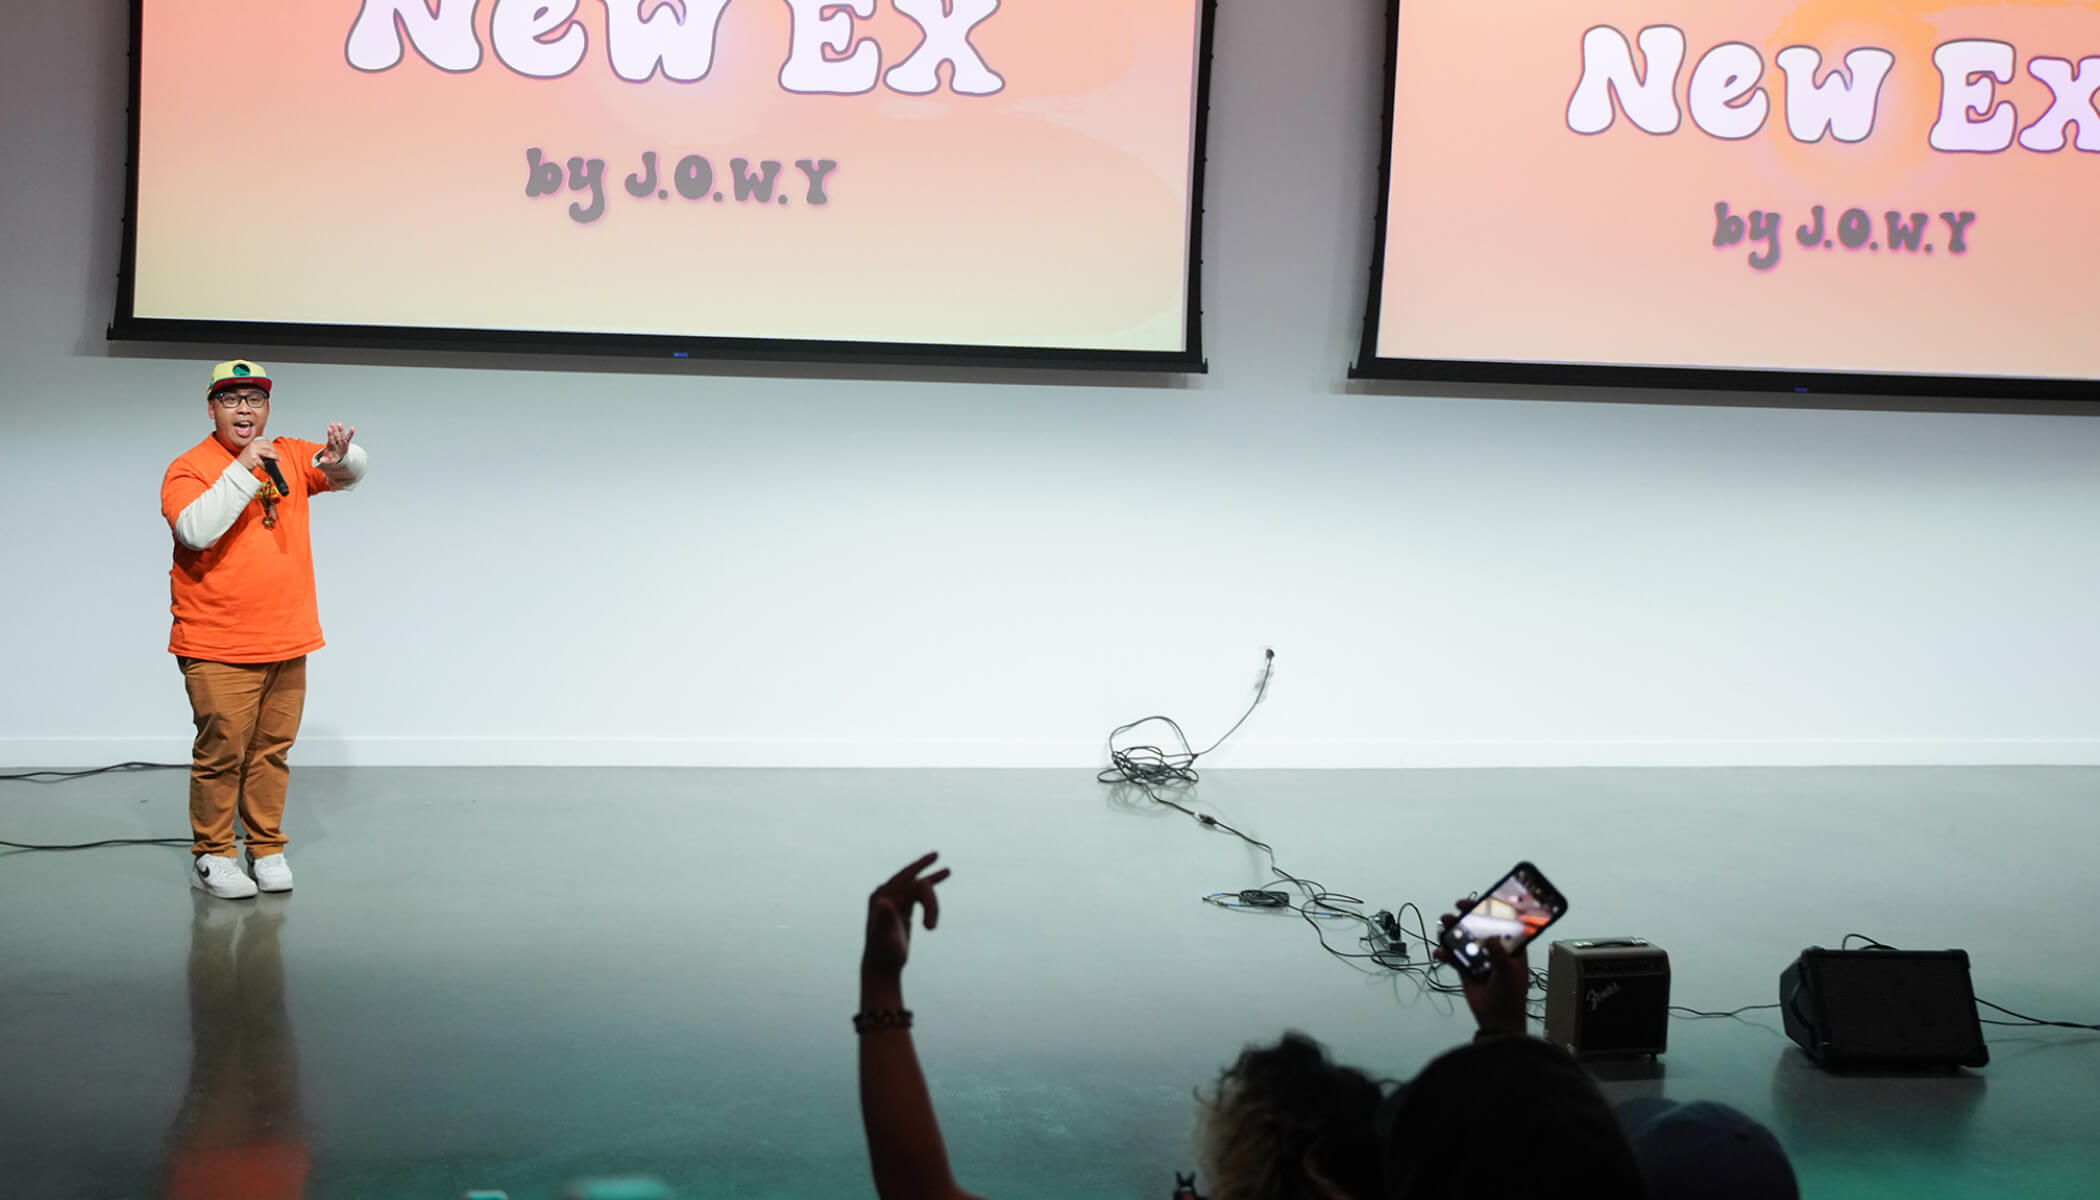 A person in an orange t-shirt and baseball cap talking into a microphone in front of an audience. Screens that say “New Ex by J.O.W.Y” are in the background.